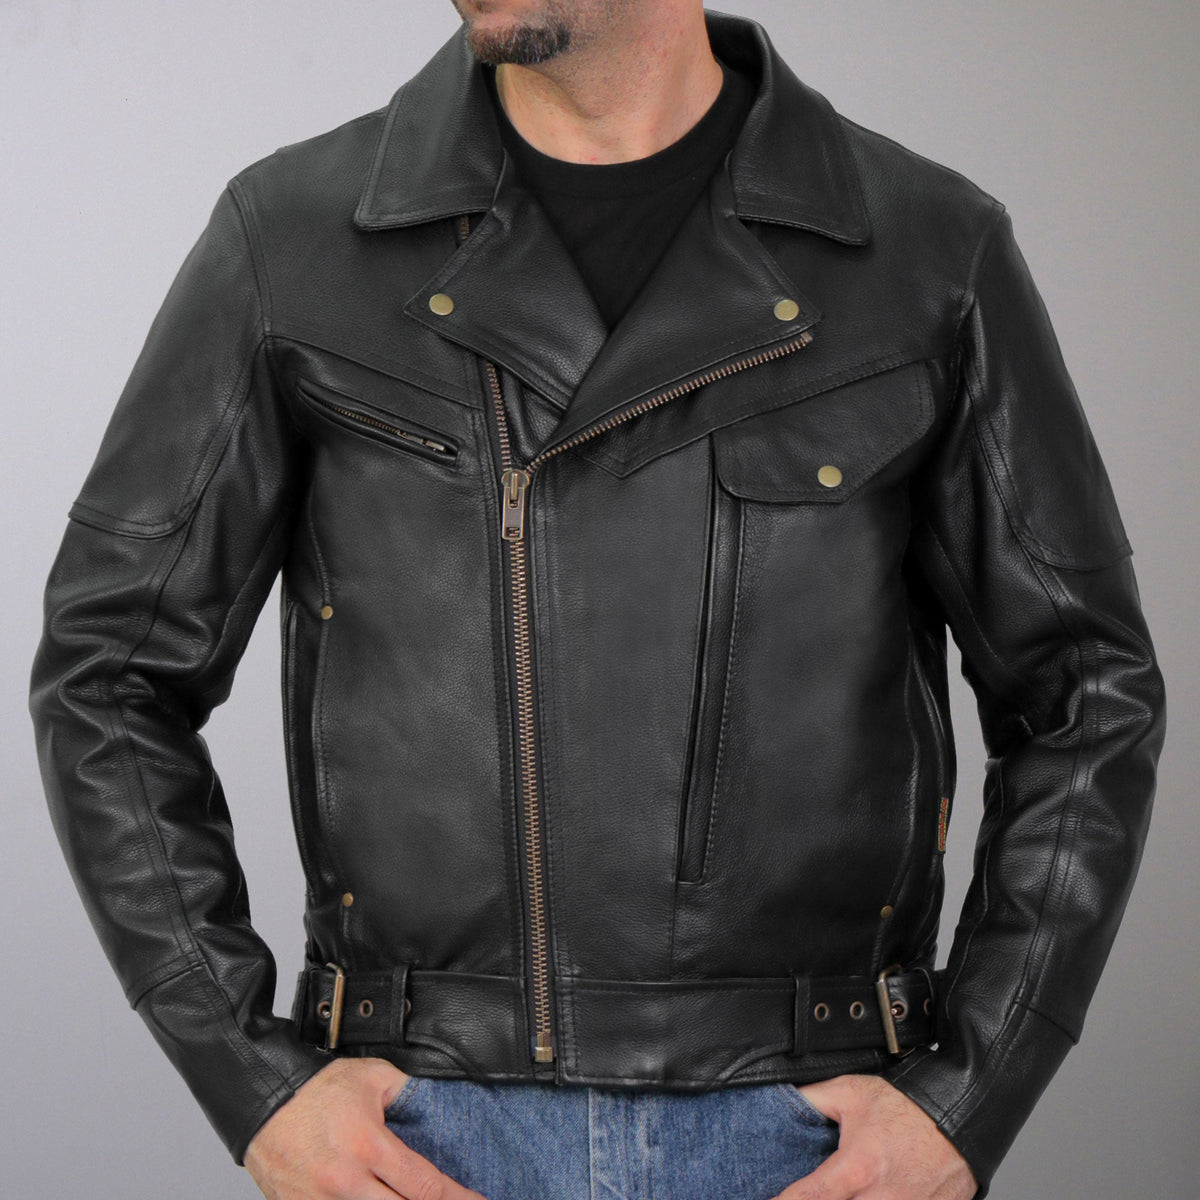 Hot Leathers JKM1022 Mens Motorcycle Leather Biker Jacket with Conceal ...